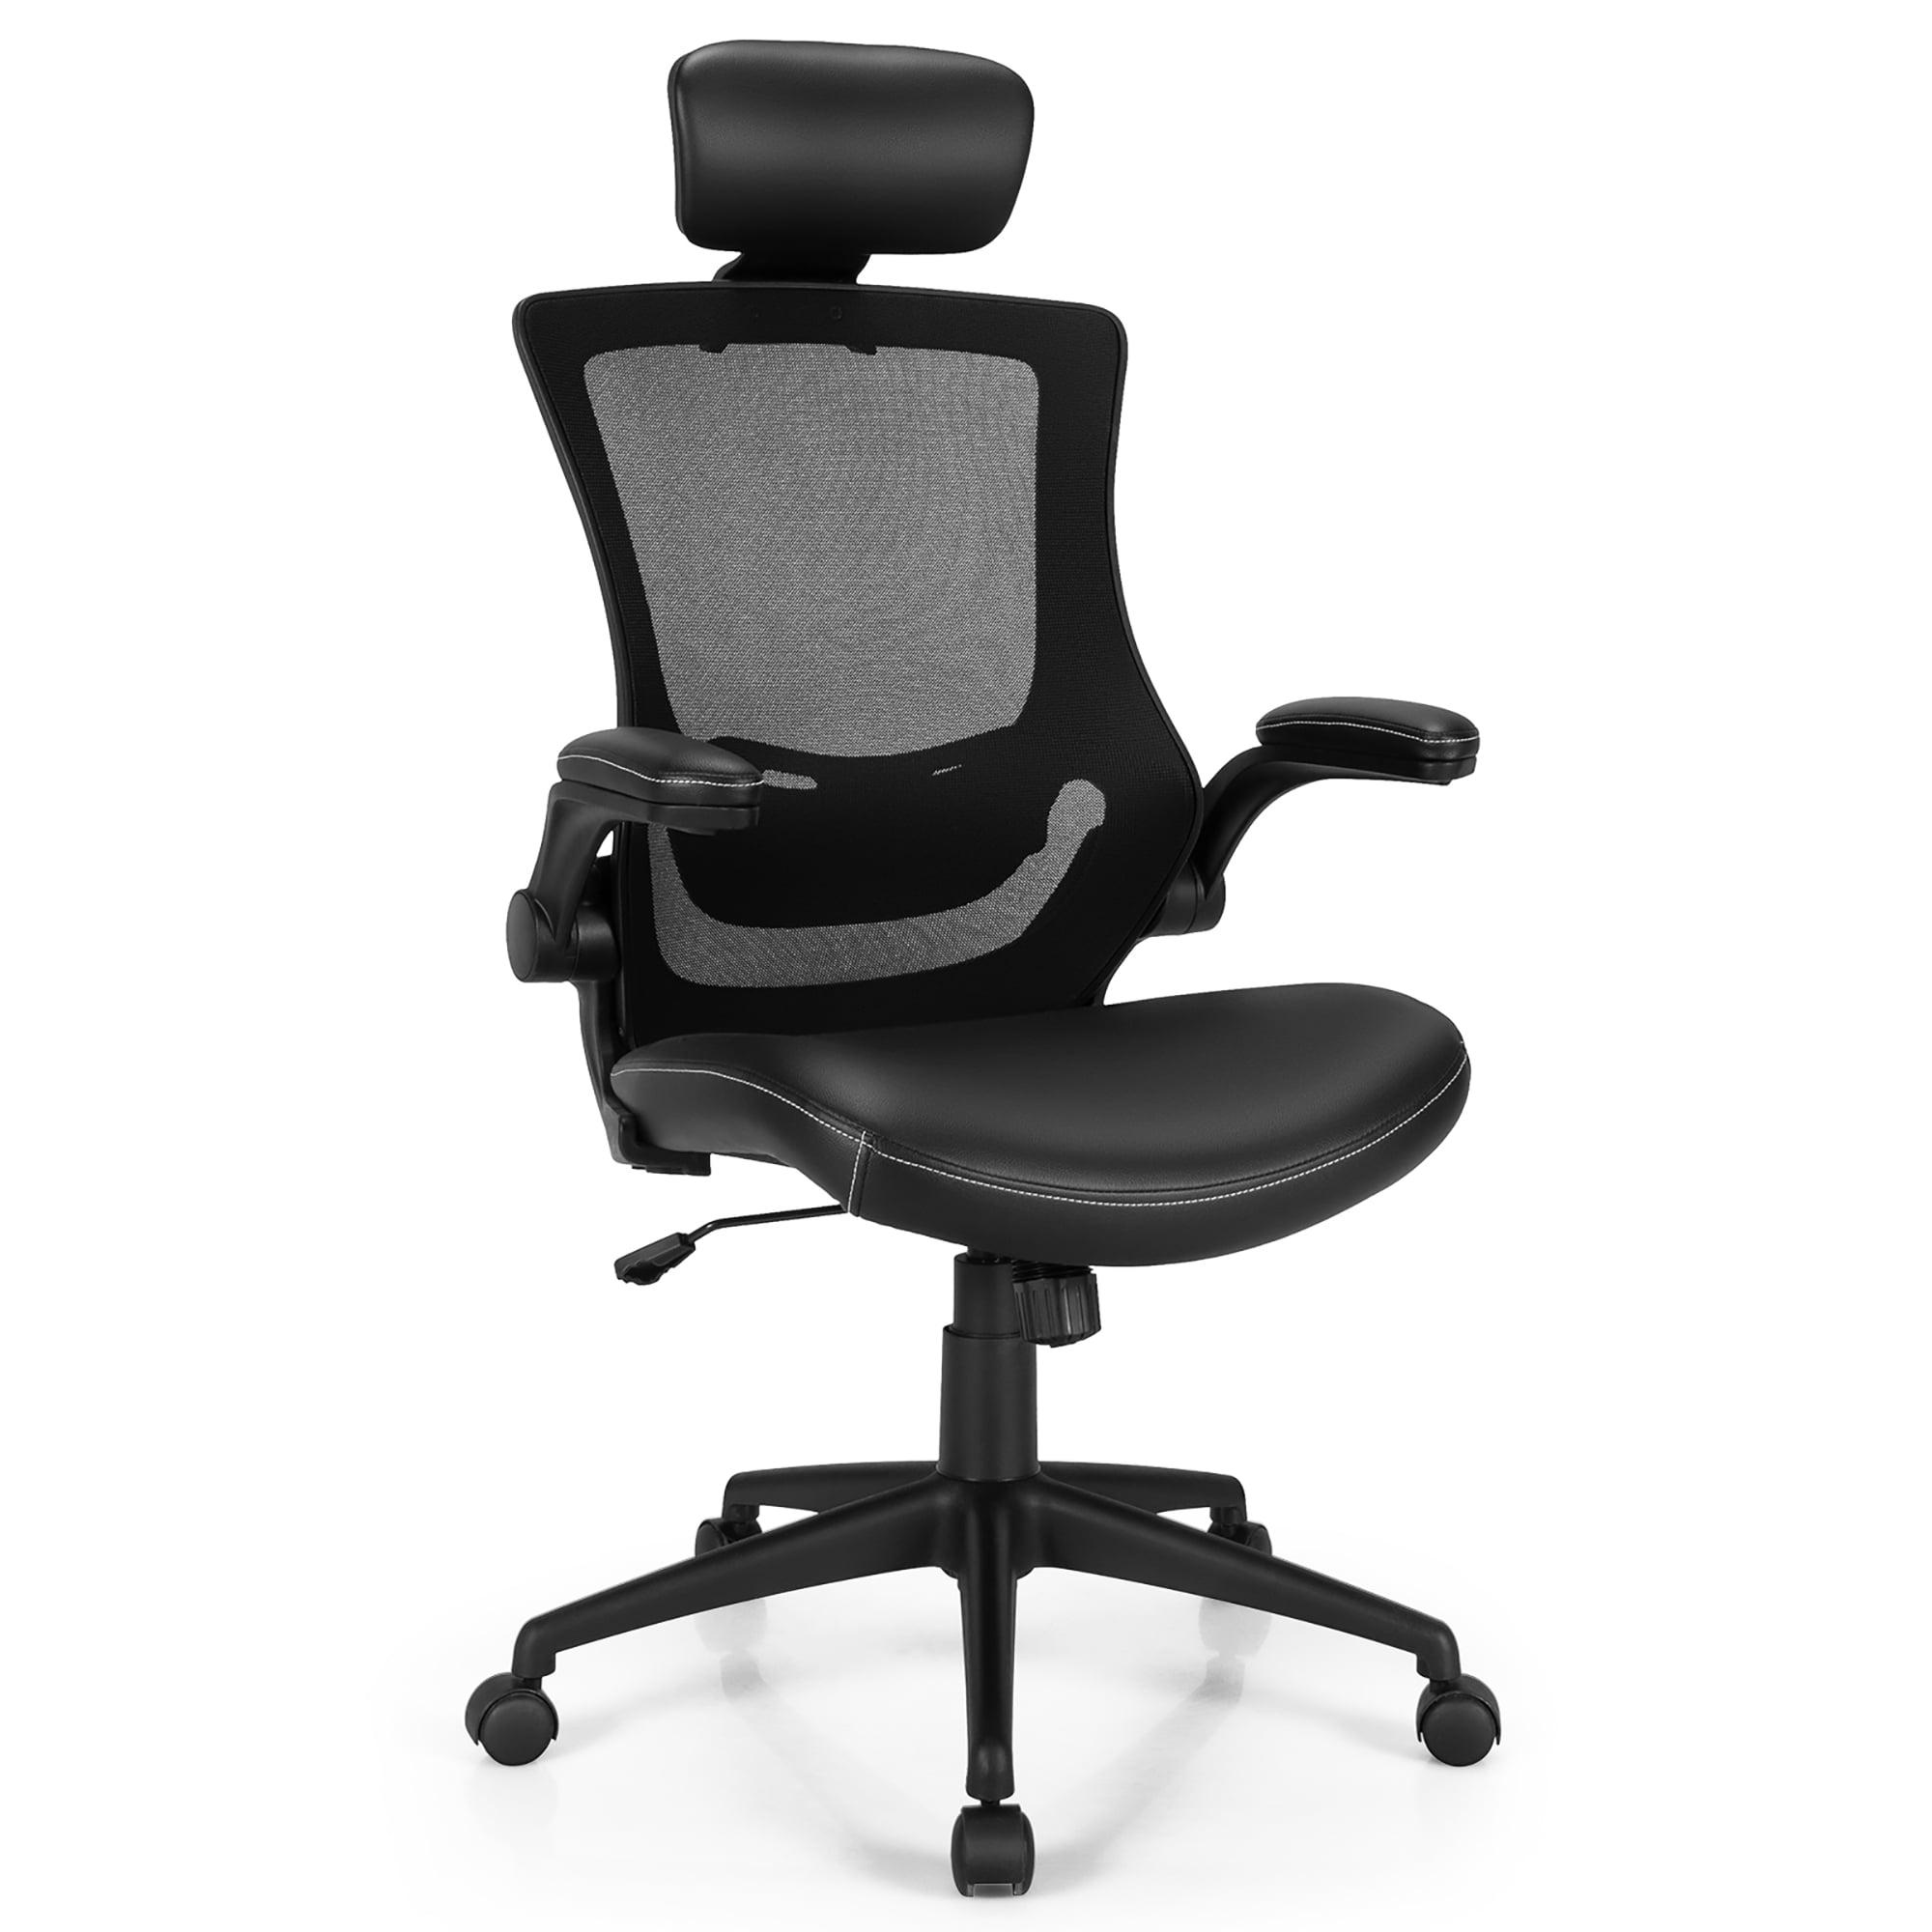 ErgoFlex Mesh and Leather Adjustable Office Chair with Swivel Base - Black